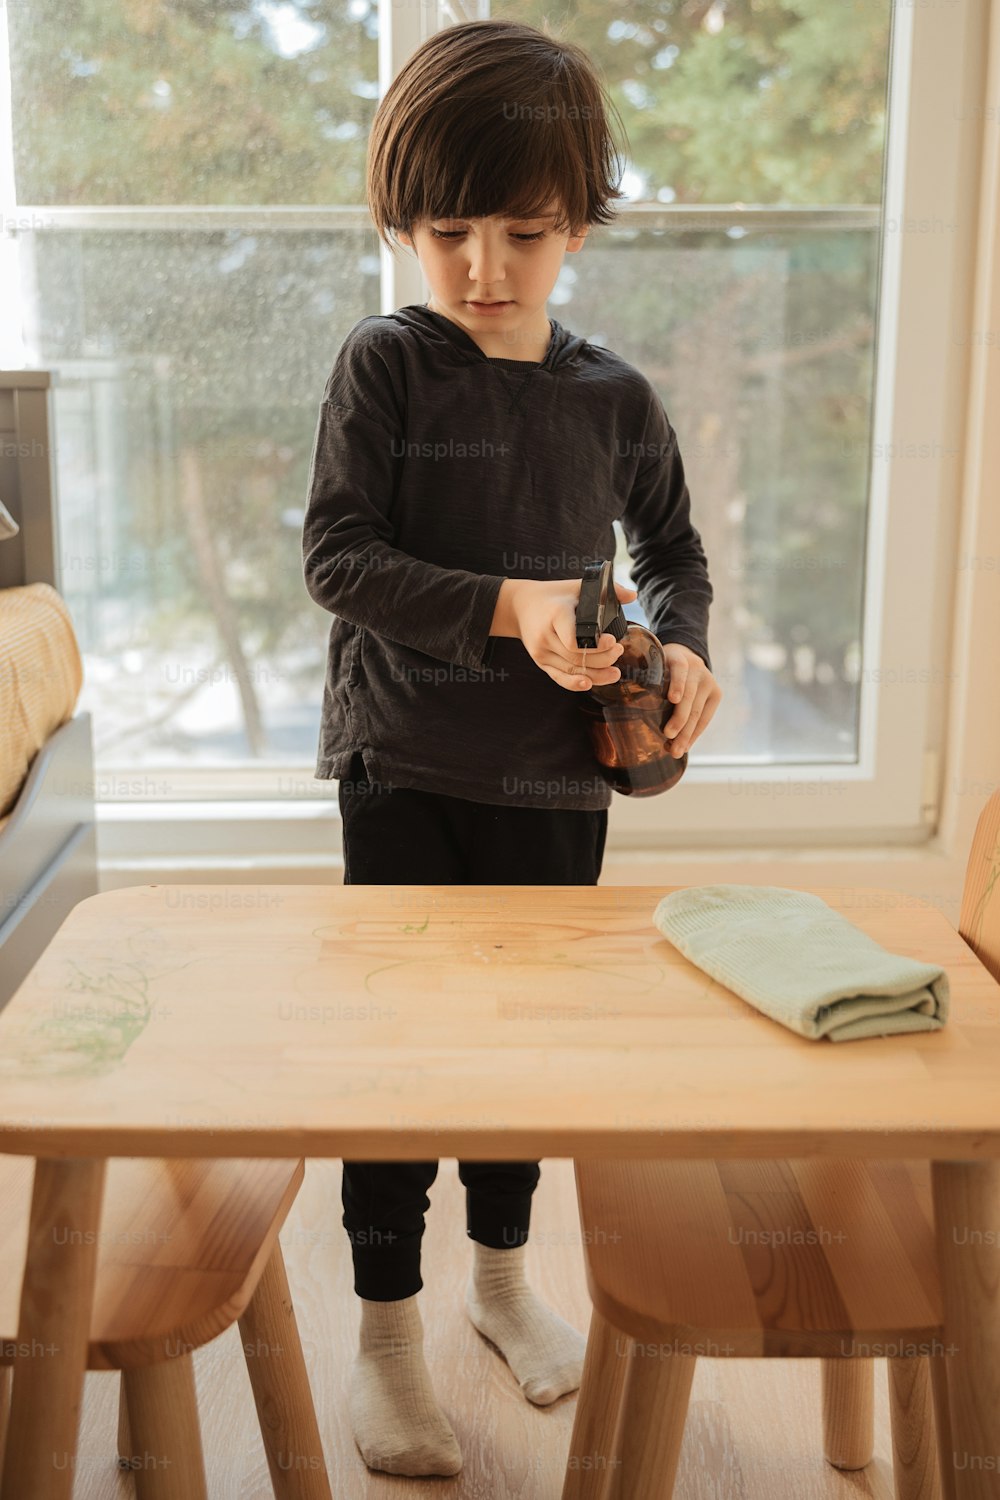 a young boy standing at a wooden table